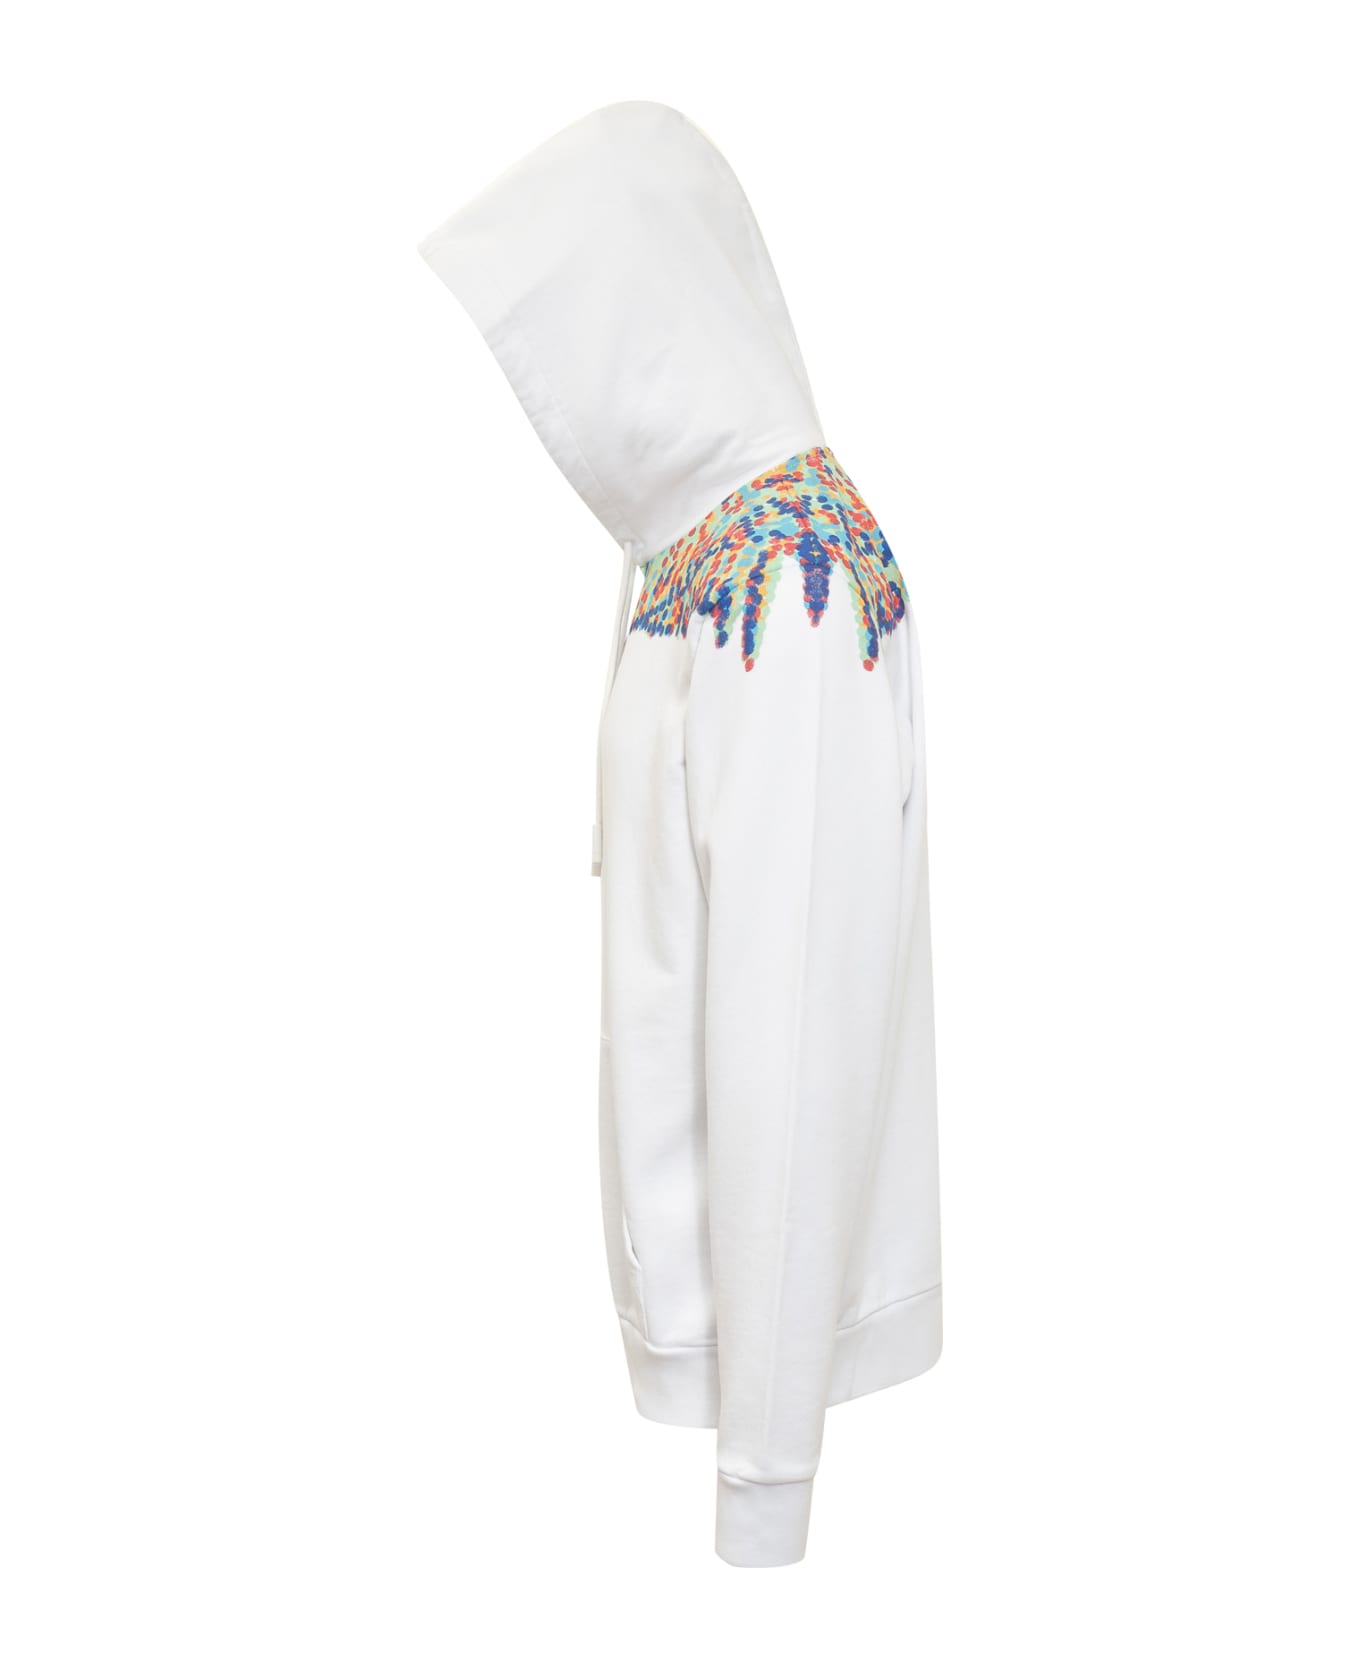 Marcelo Burlon Hoodie With Multicolor Pointillism Wings - White